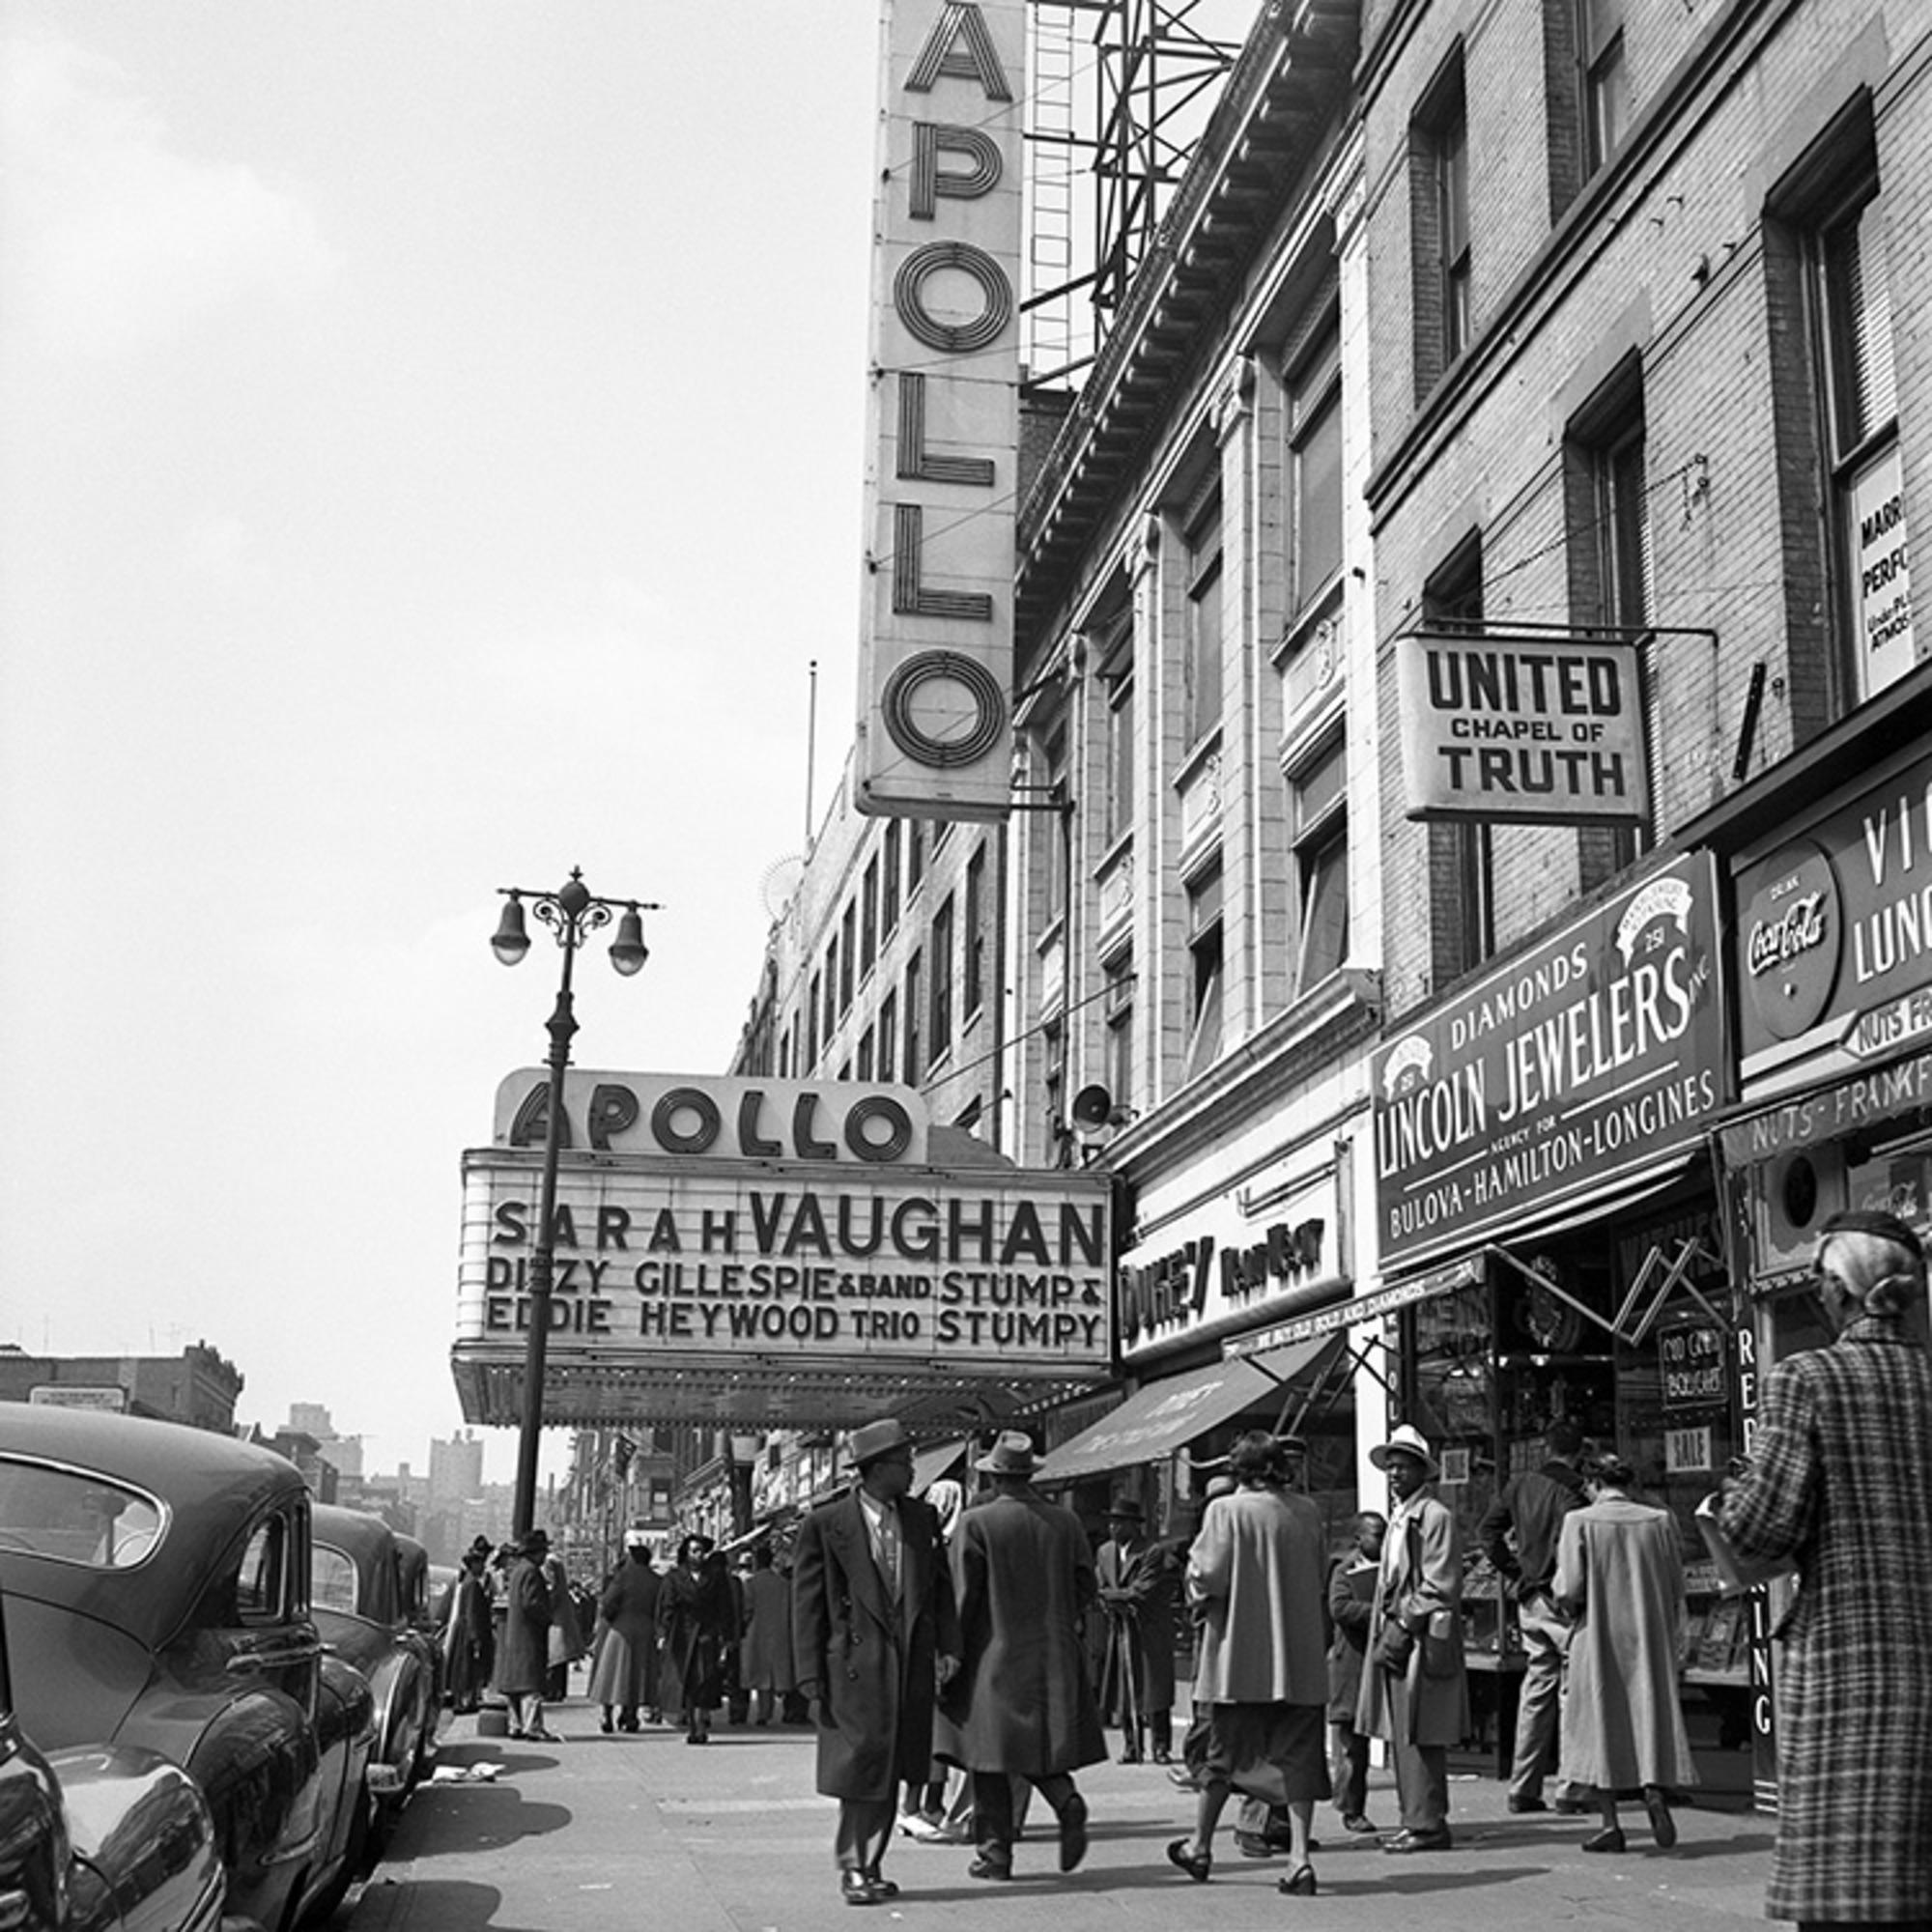 Gelatin-silver print

The Apollo Theatre on West 125th Street in Harlem New York, circa 1950s.

Available Sizes:
12" x 16” Edition of 25
16” x 20” Edition of 25
20" x 24” Edition of 25
30” x 40” Edition of 25
